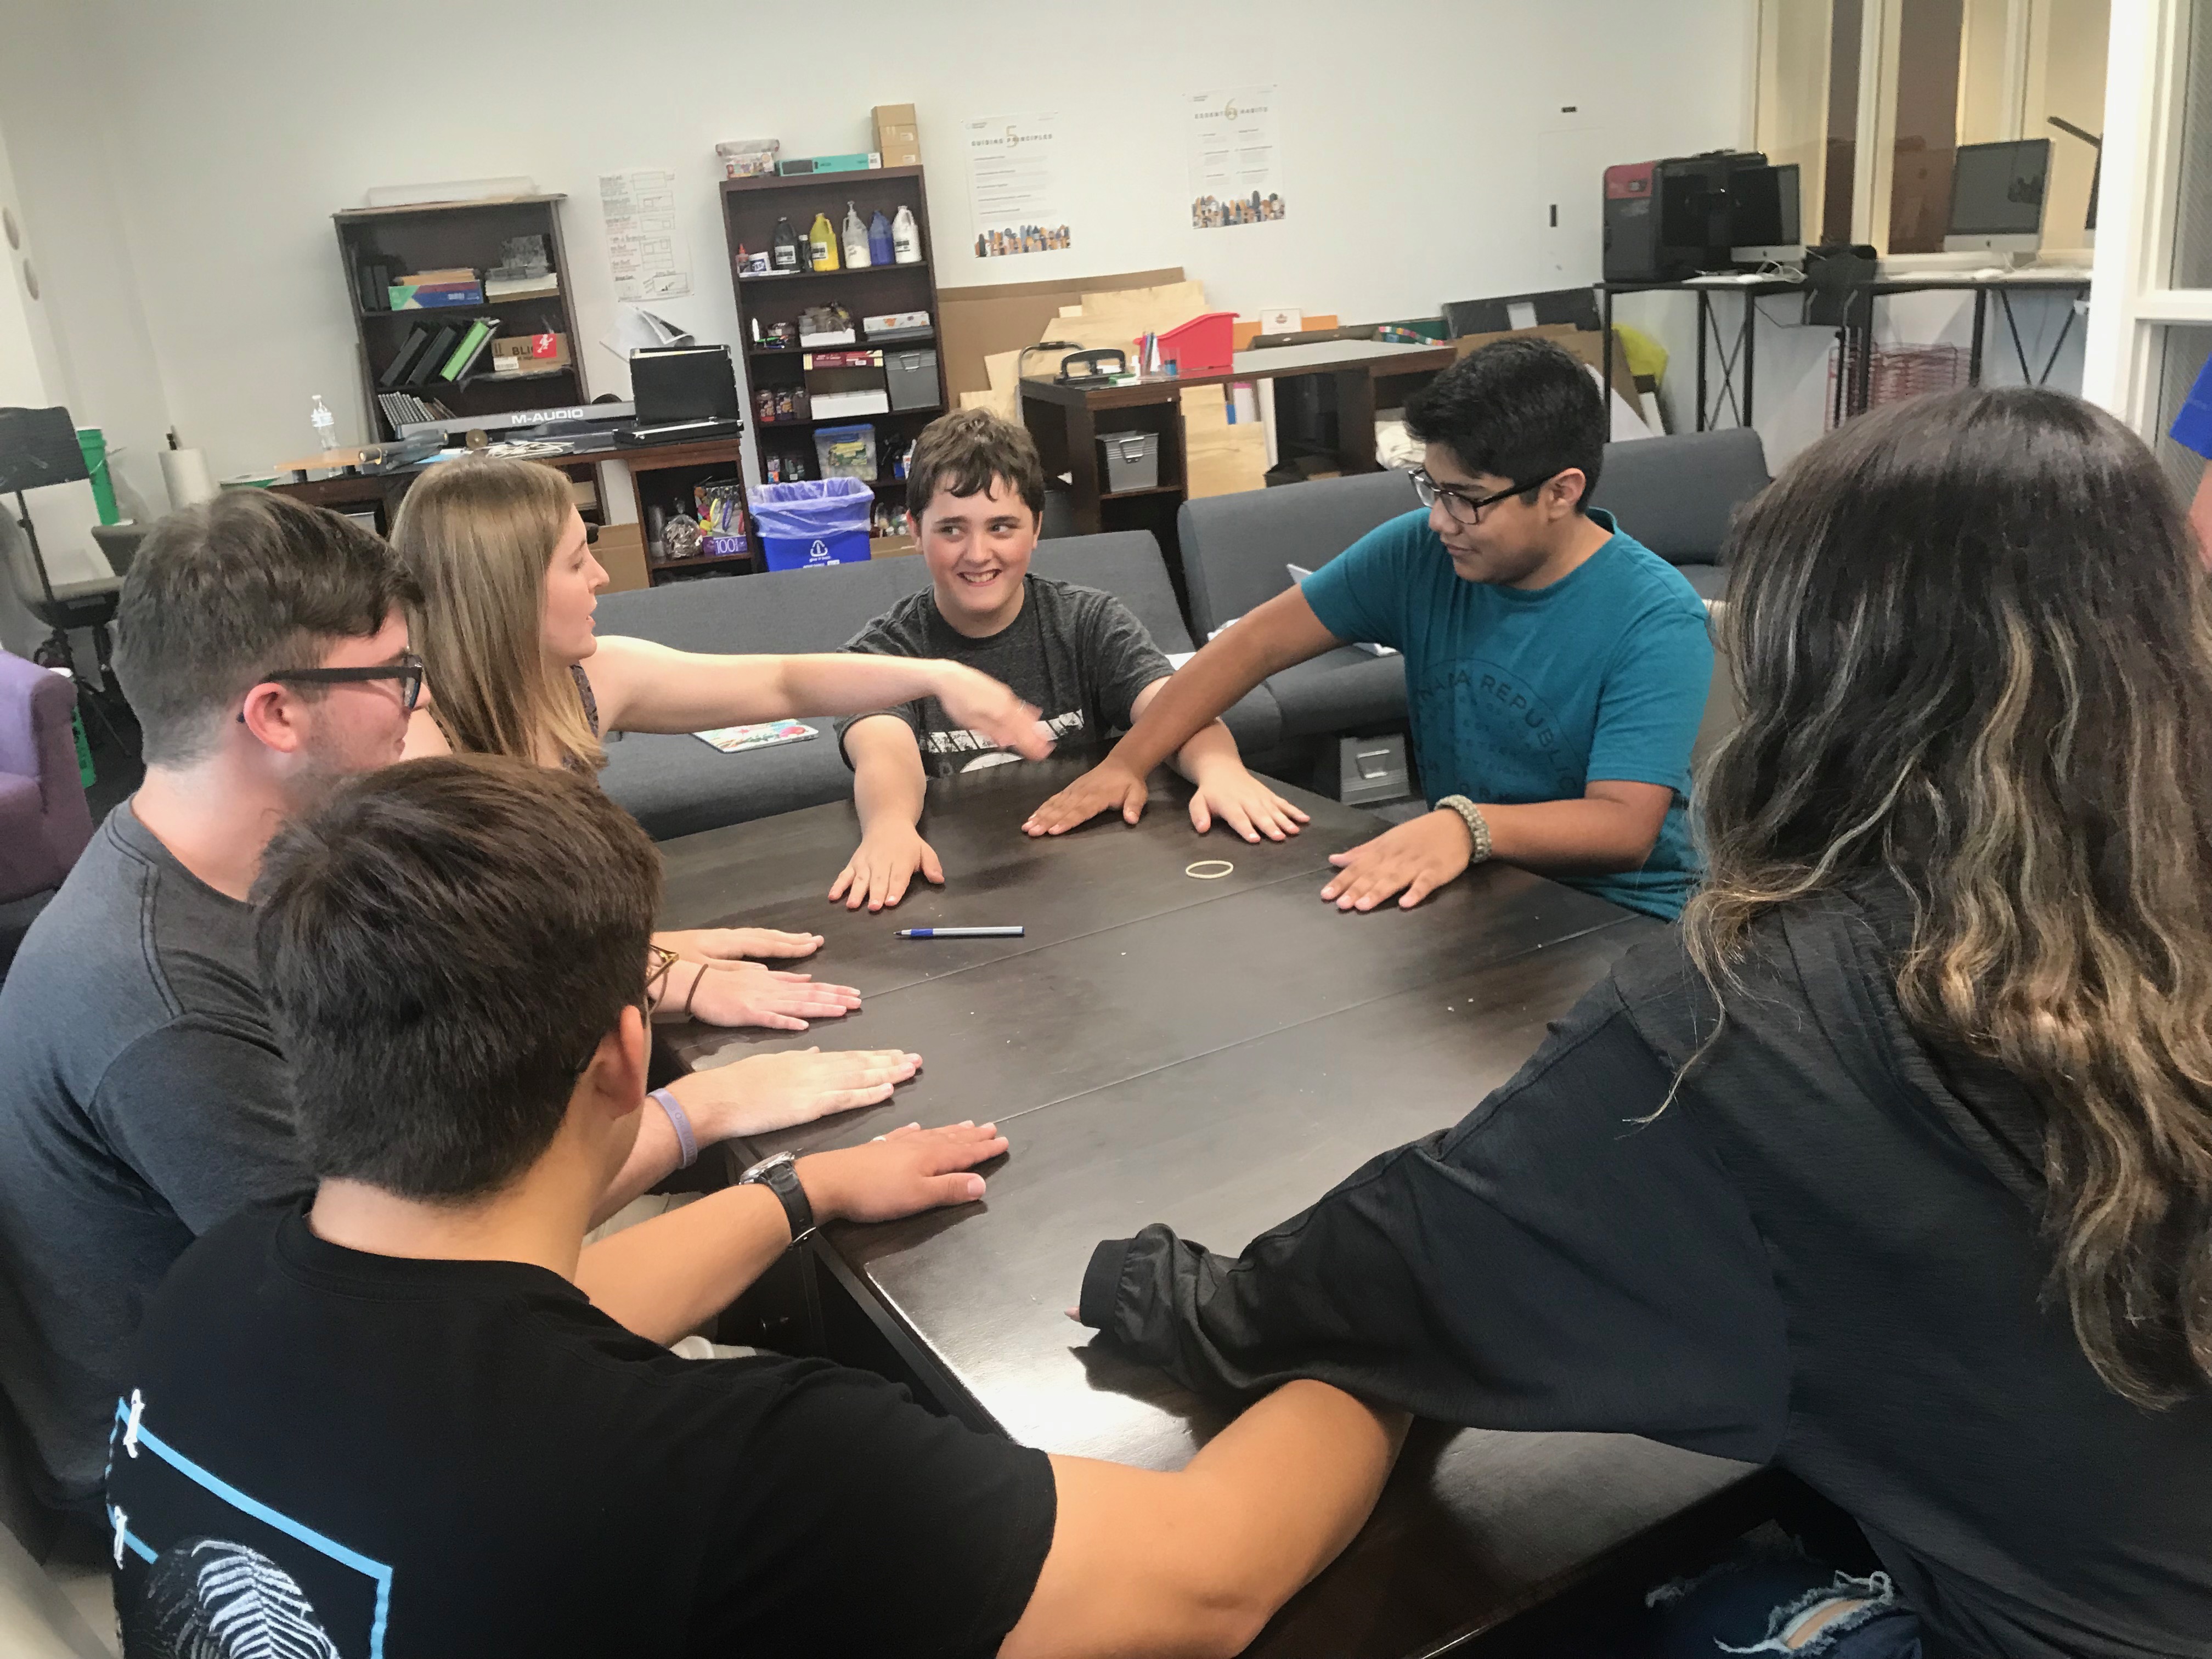 Students gather around a table and play a game where they overlap their arms with one another.